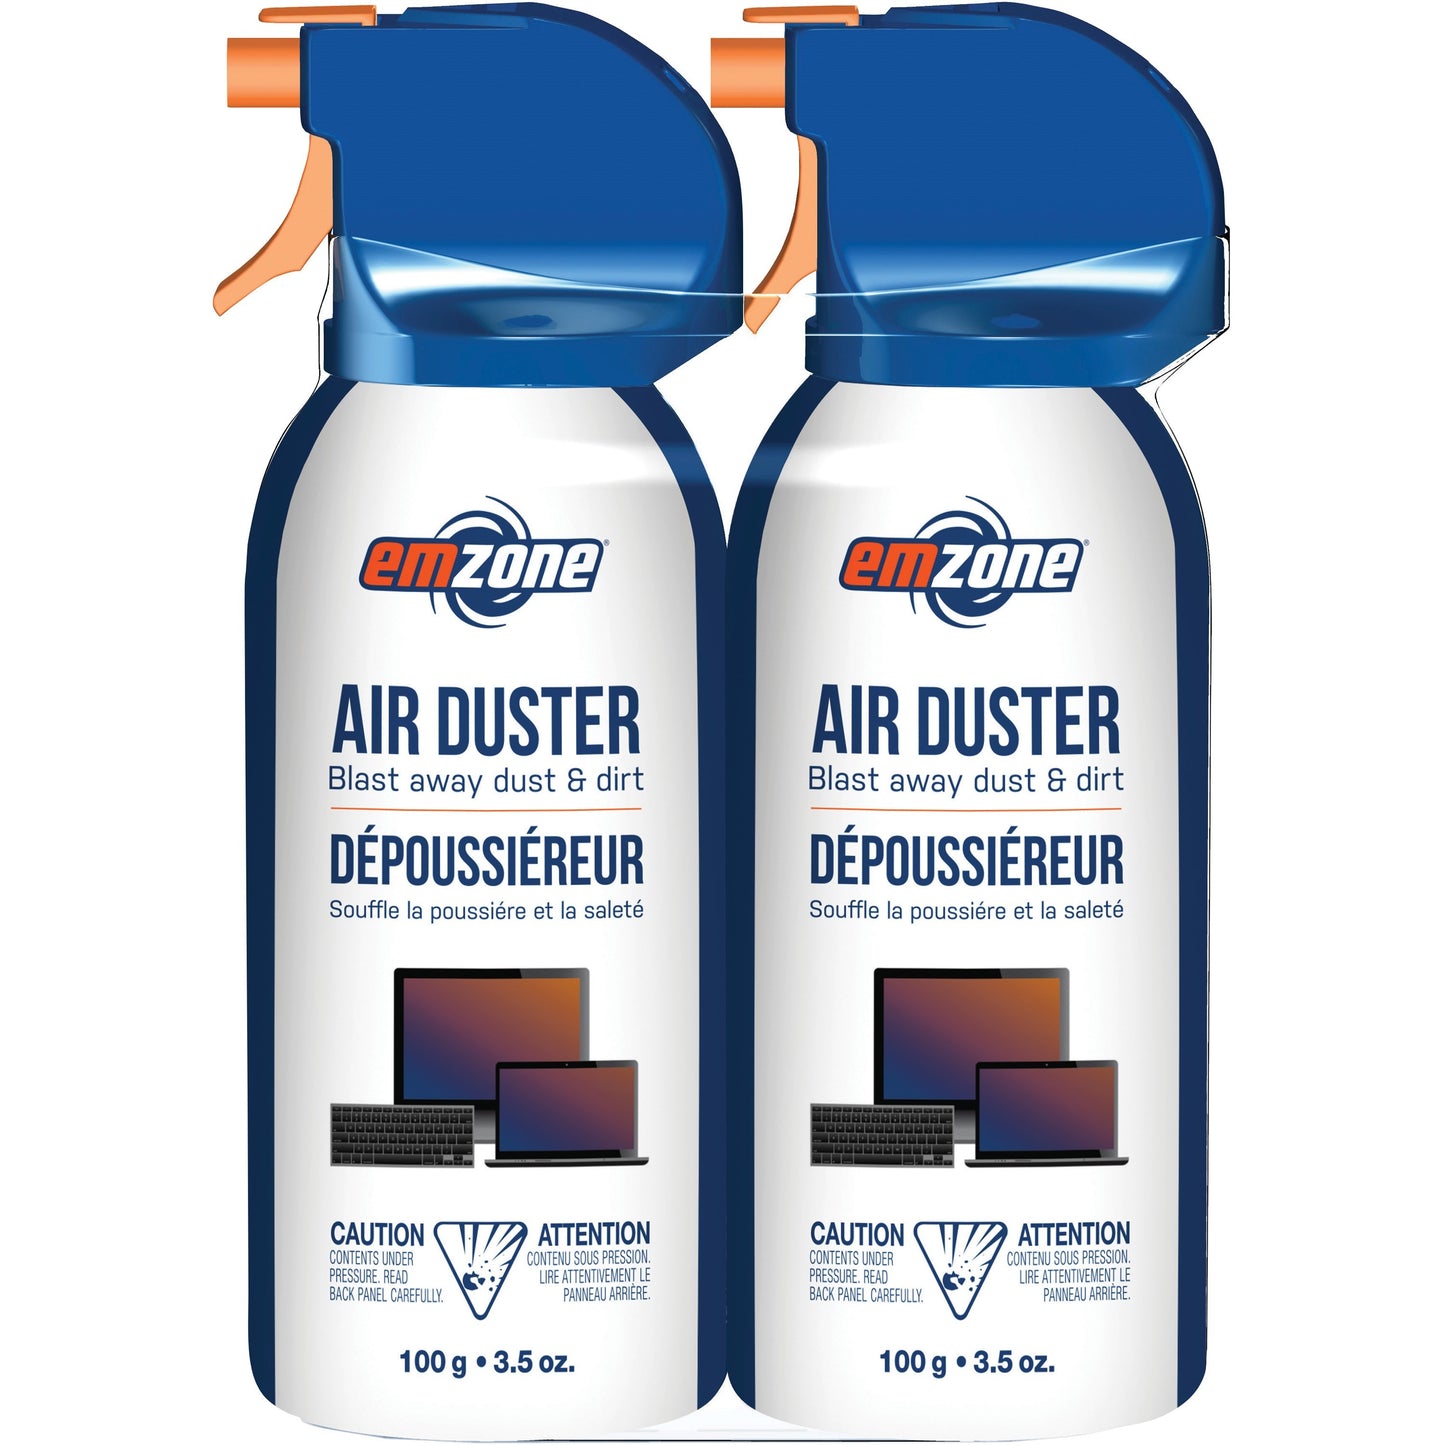 Emzone Mini Air Duster 100 g 2-pack - For Computer, Electronic Equipment, Office Equipment, Automotive - 100 g - Ozone-safe, VOC-free, Residue-free, Moisture-free - 1 / Pack - Multi